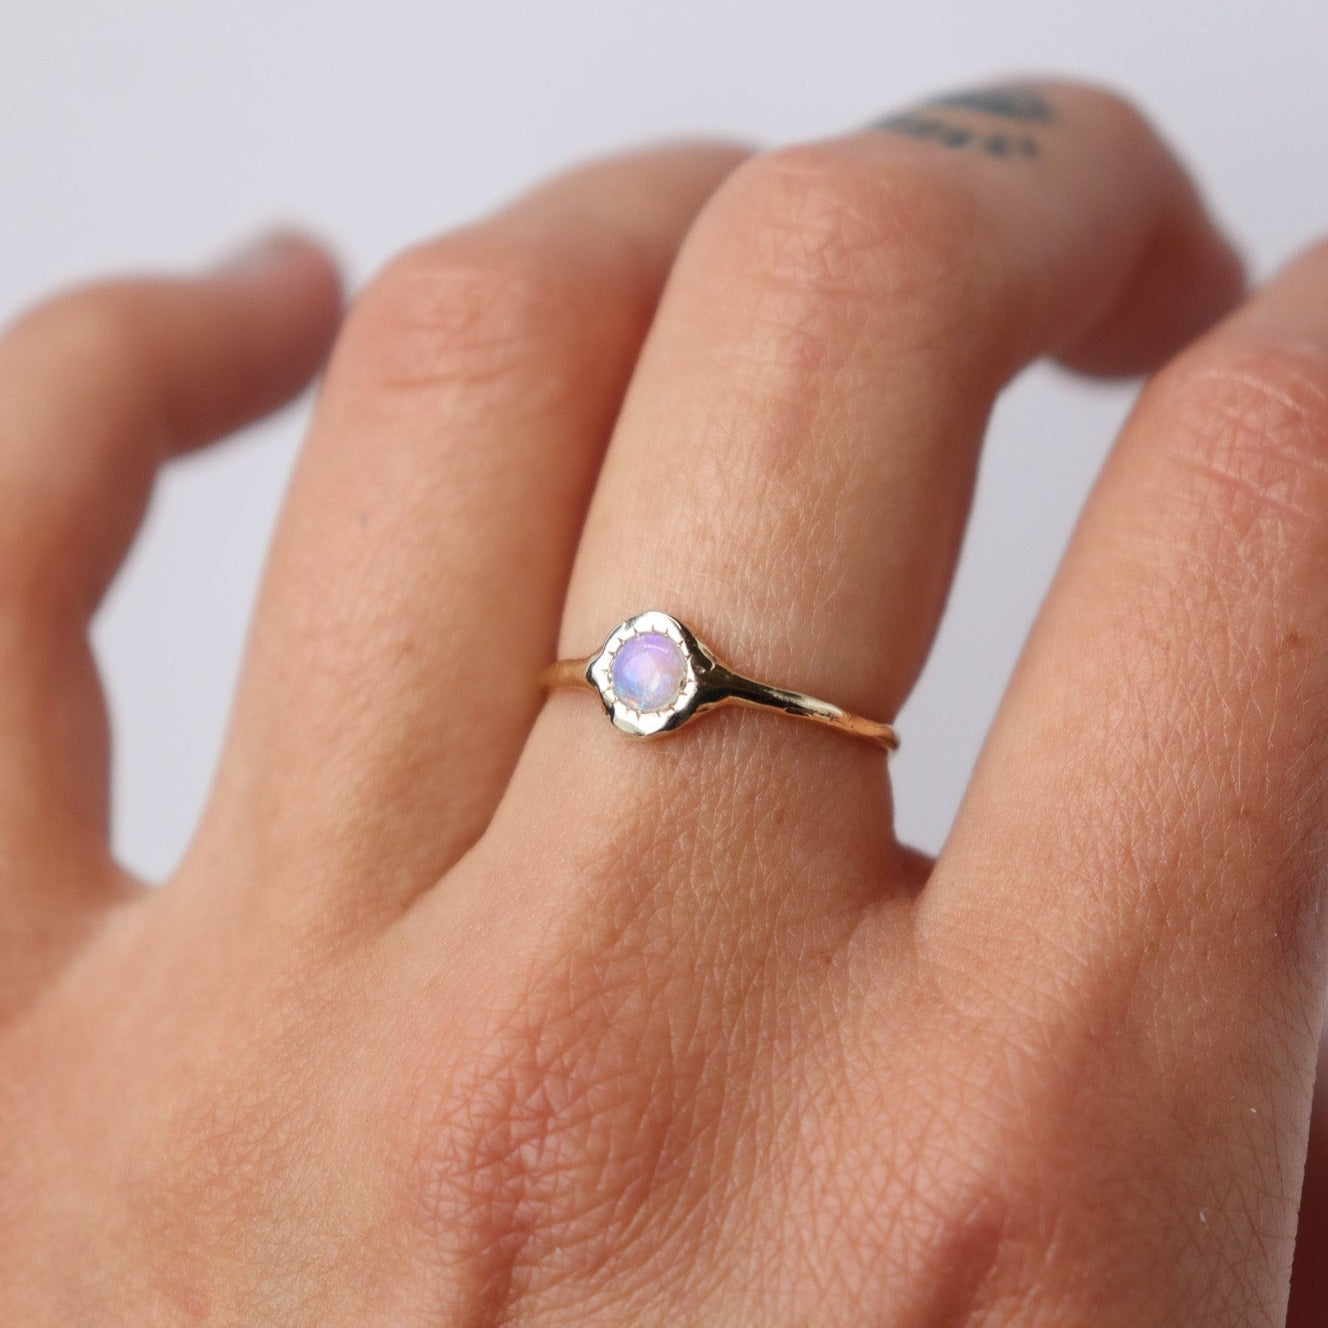 Unique round opal ring, set on a slender band with small tick-like accents that radiate like a starburst, creating a mesmerizing and celestial jewelry piece, worn on a hand to showcase scale.